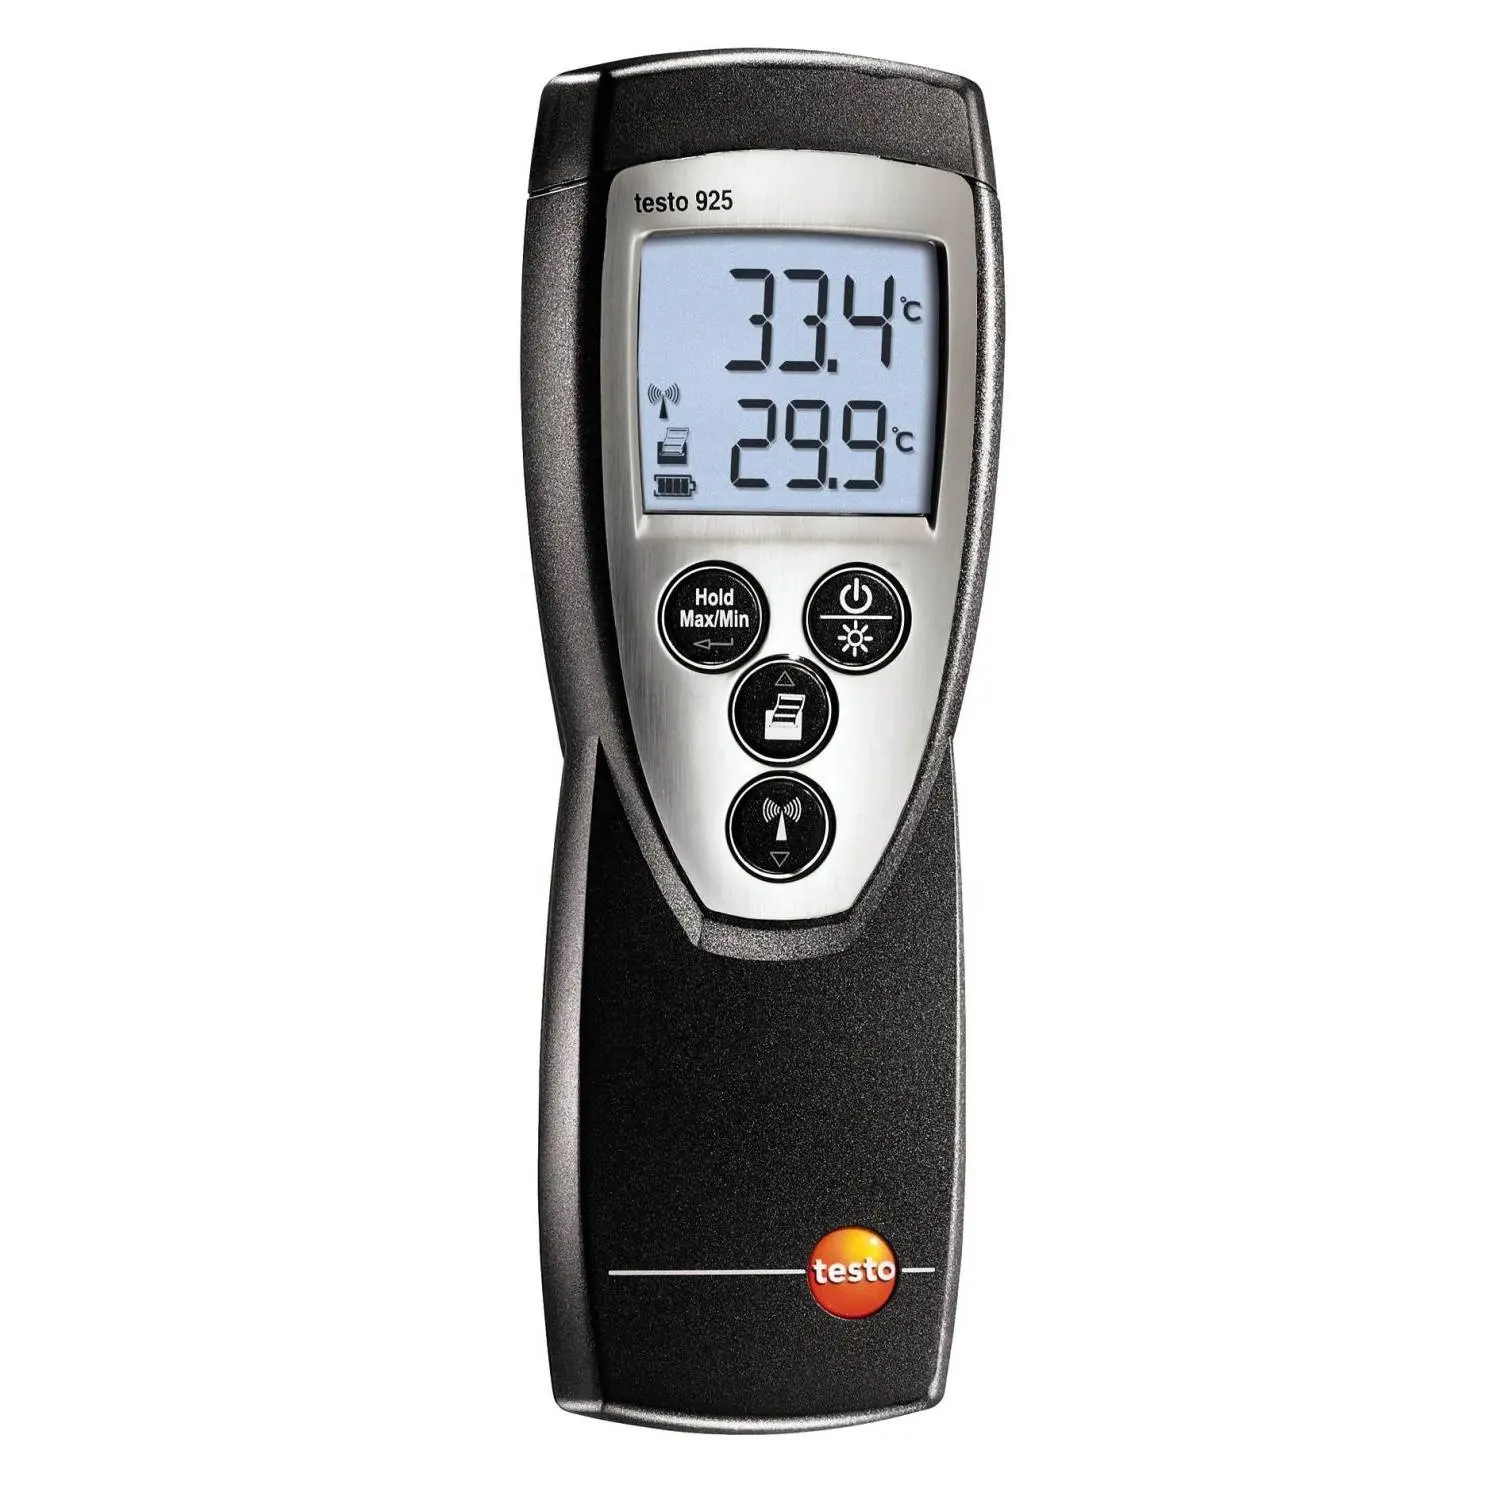 testo 925 single channel contact type digital temperature measuring mete with K type thermocouple order-Nr. 0560 9250